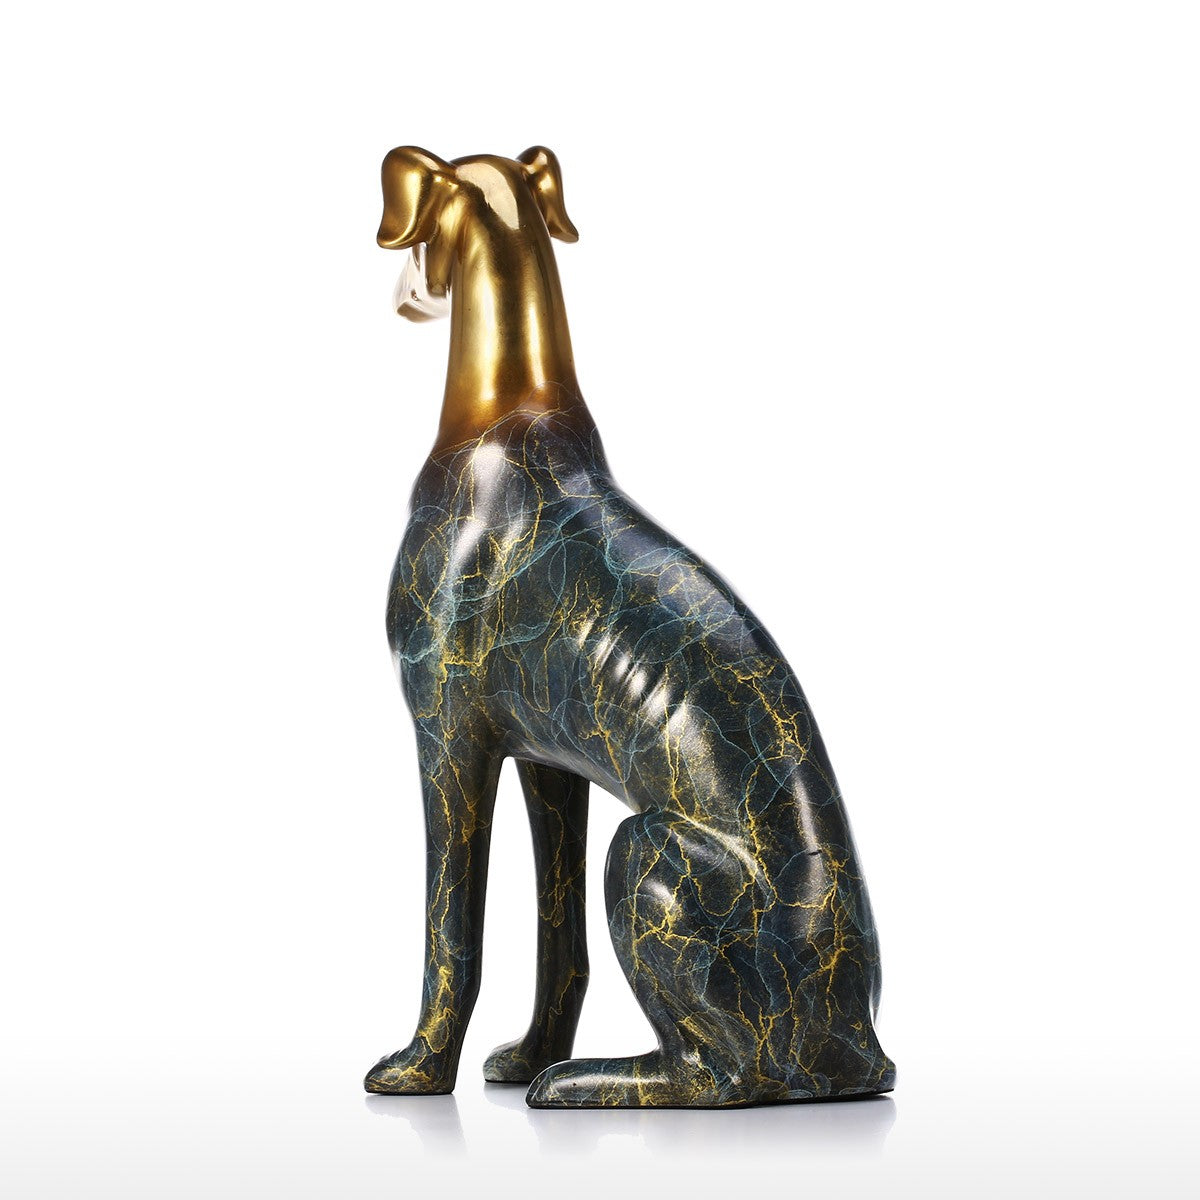 Gifts for Dog Lovers and Gifts for Dog Owners with Dog Statue for Christmas Decorations